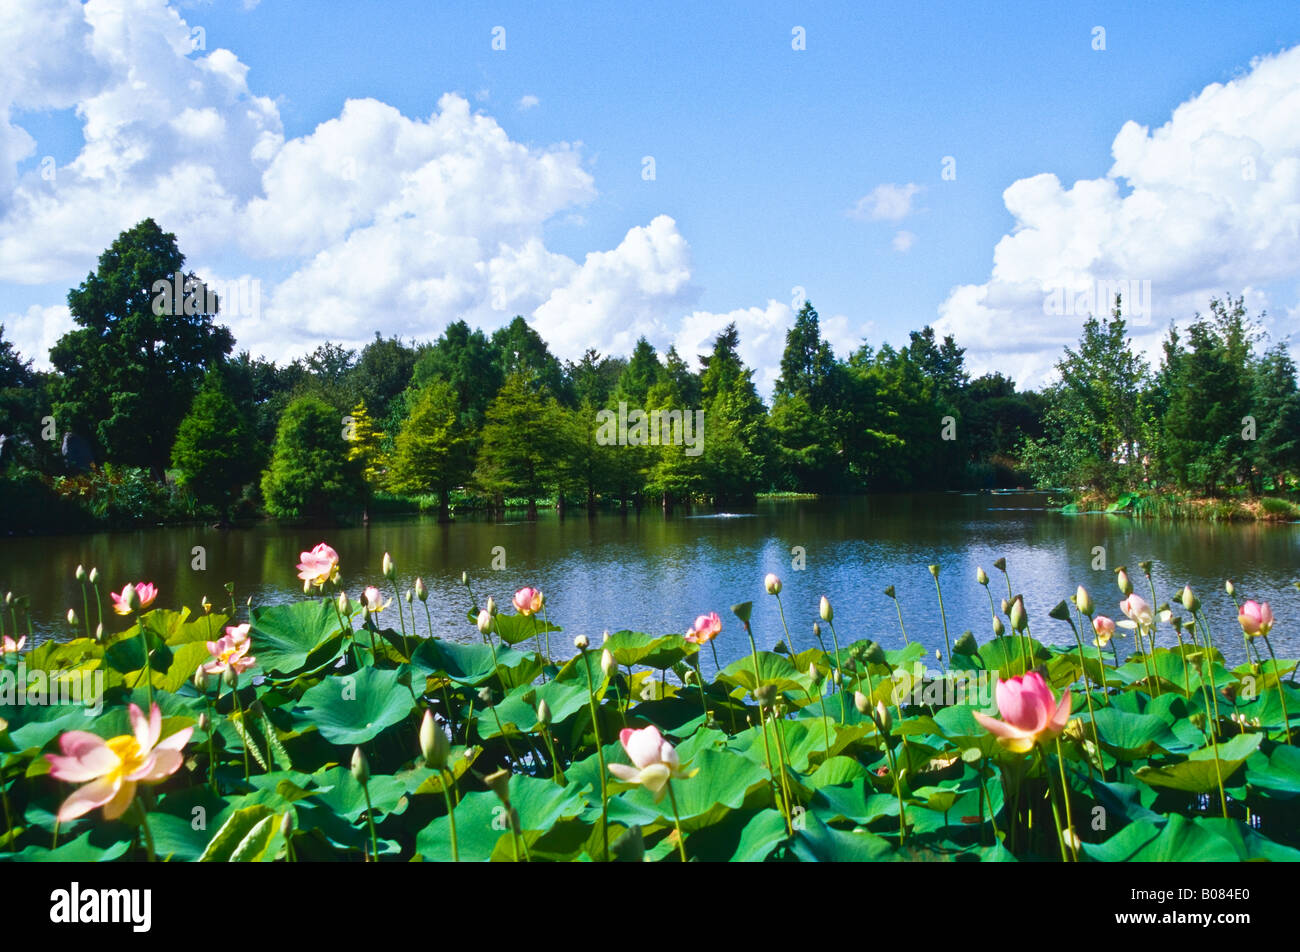 Lake with Lotos Lotus Blossoms Stock Photo